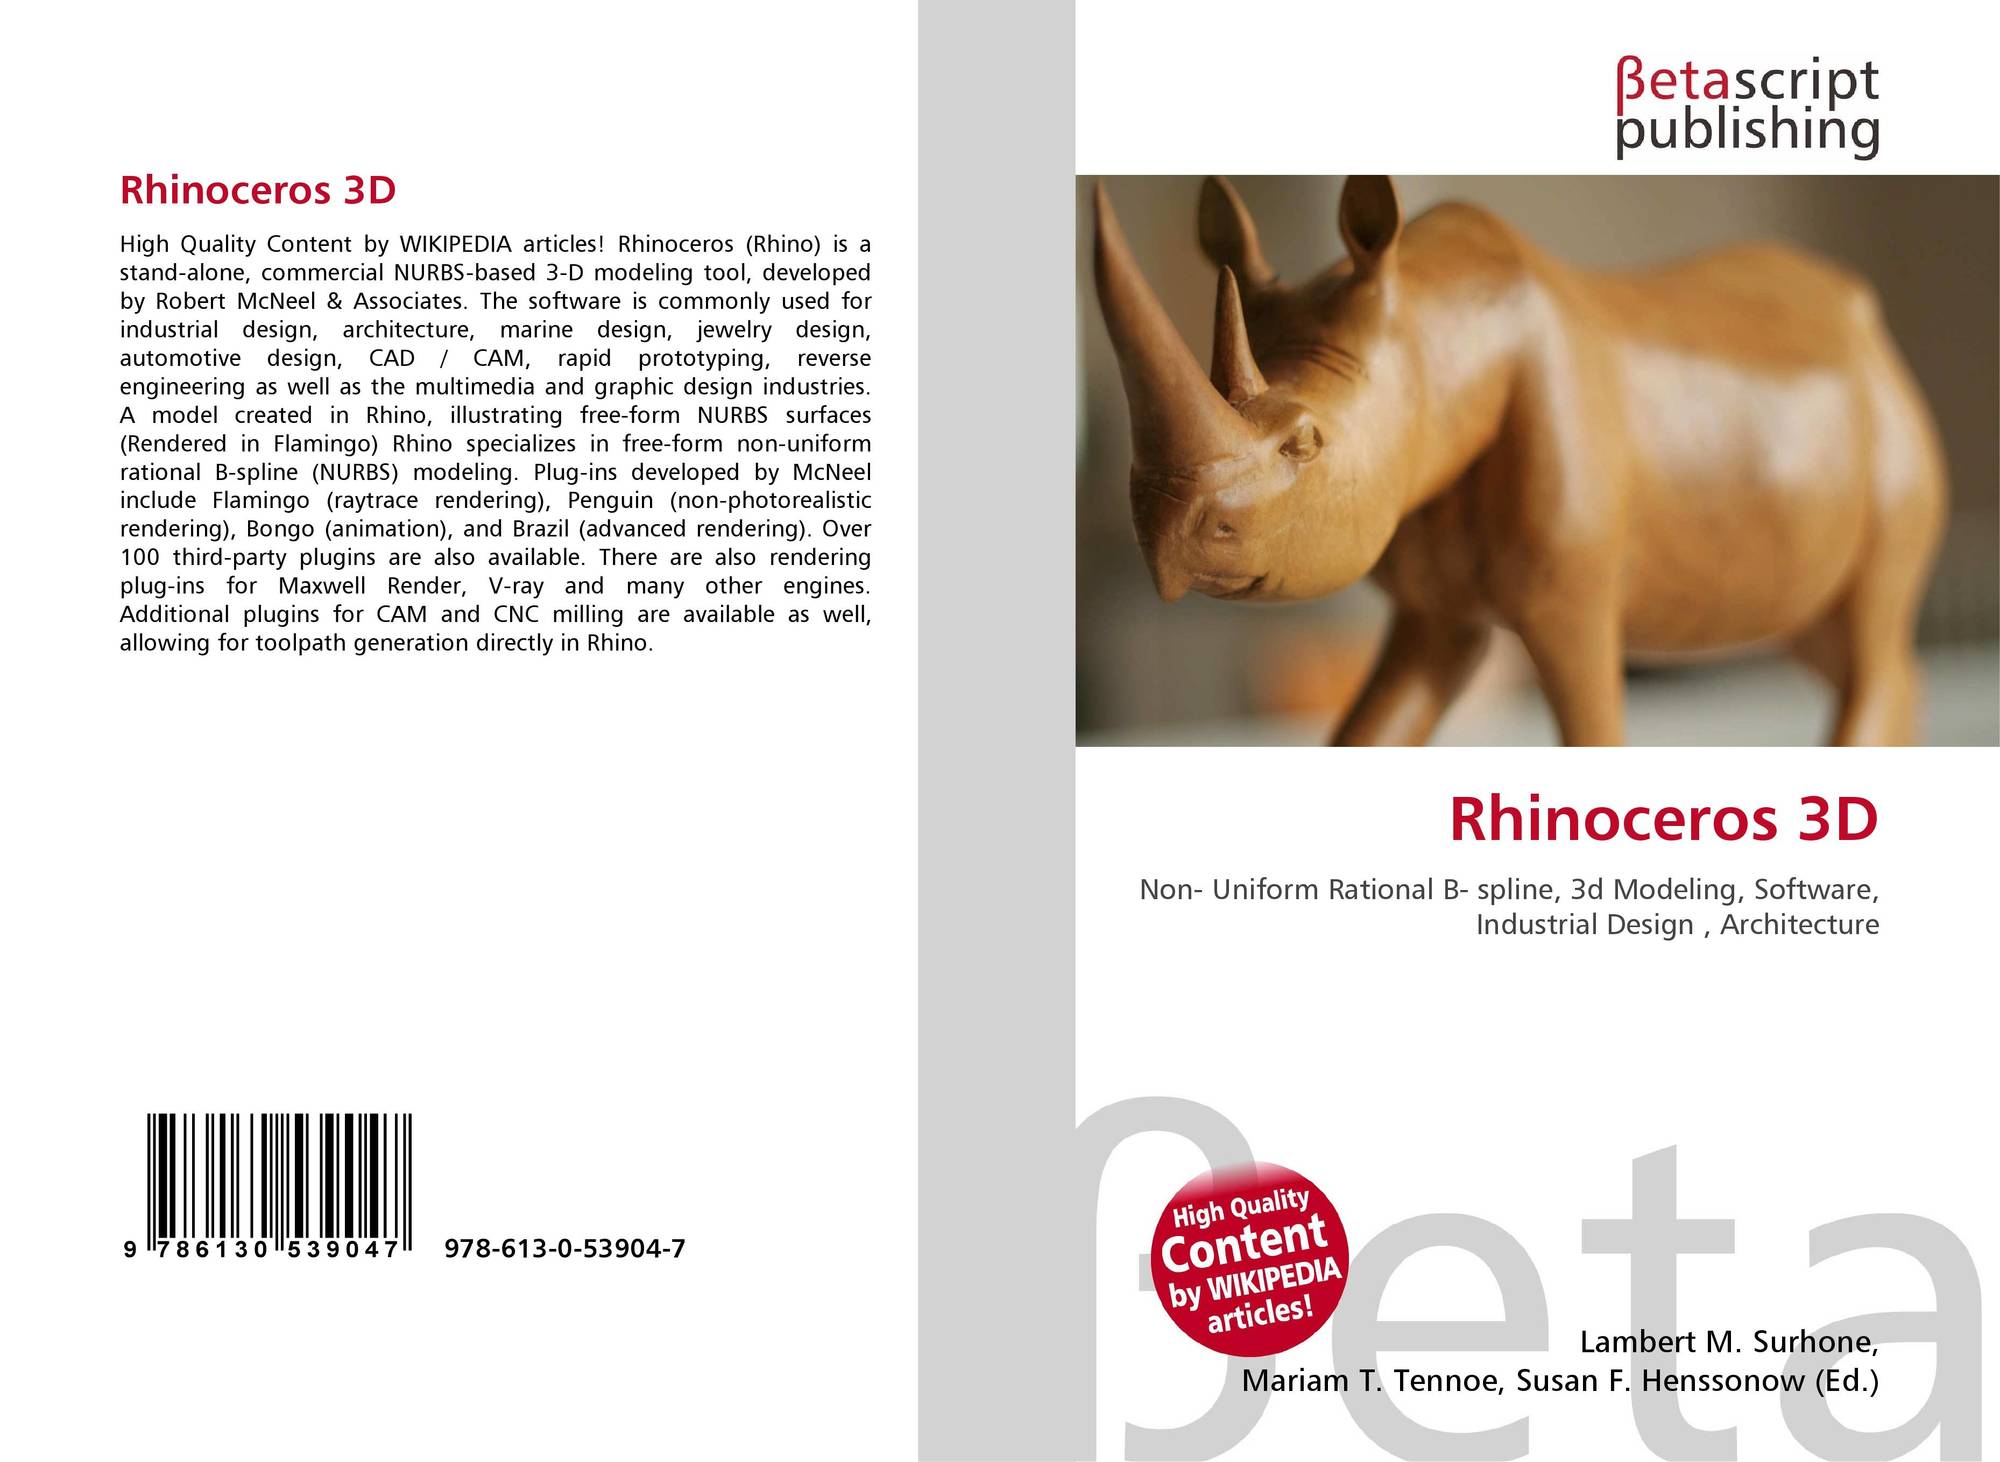 download the last version for ios Rhinoceros 3D 7.30.23163.13001